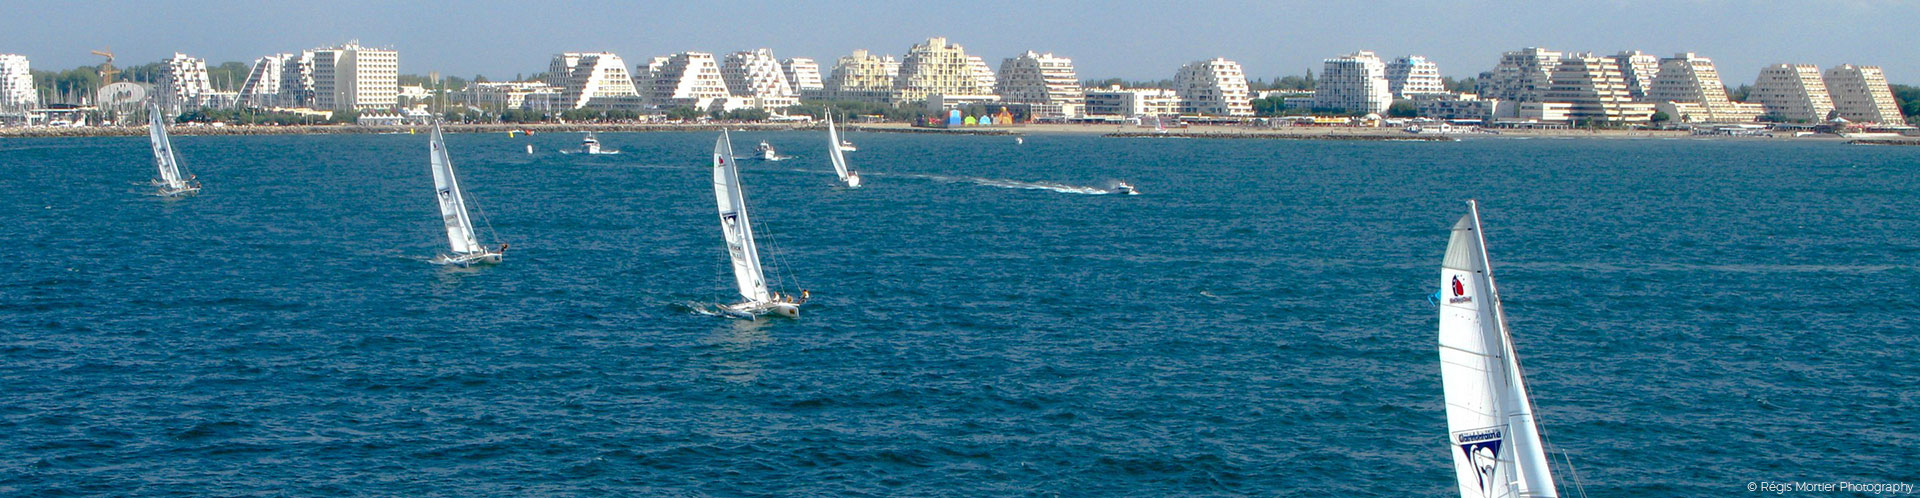 sailing boats on the Mediterranean Sea with a view of the Grande-Motte buildings